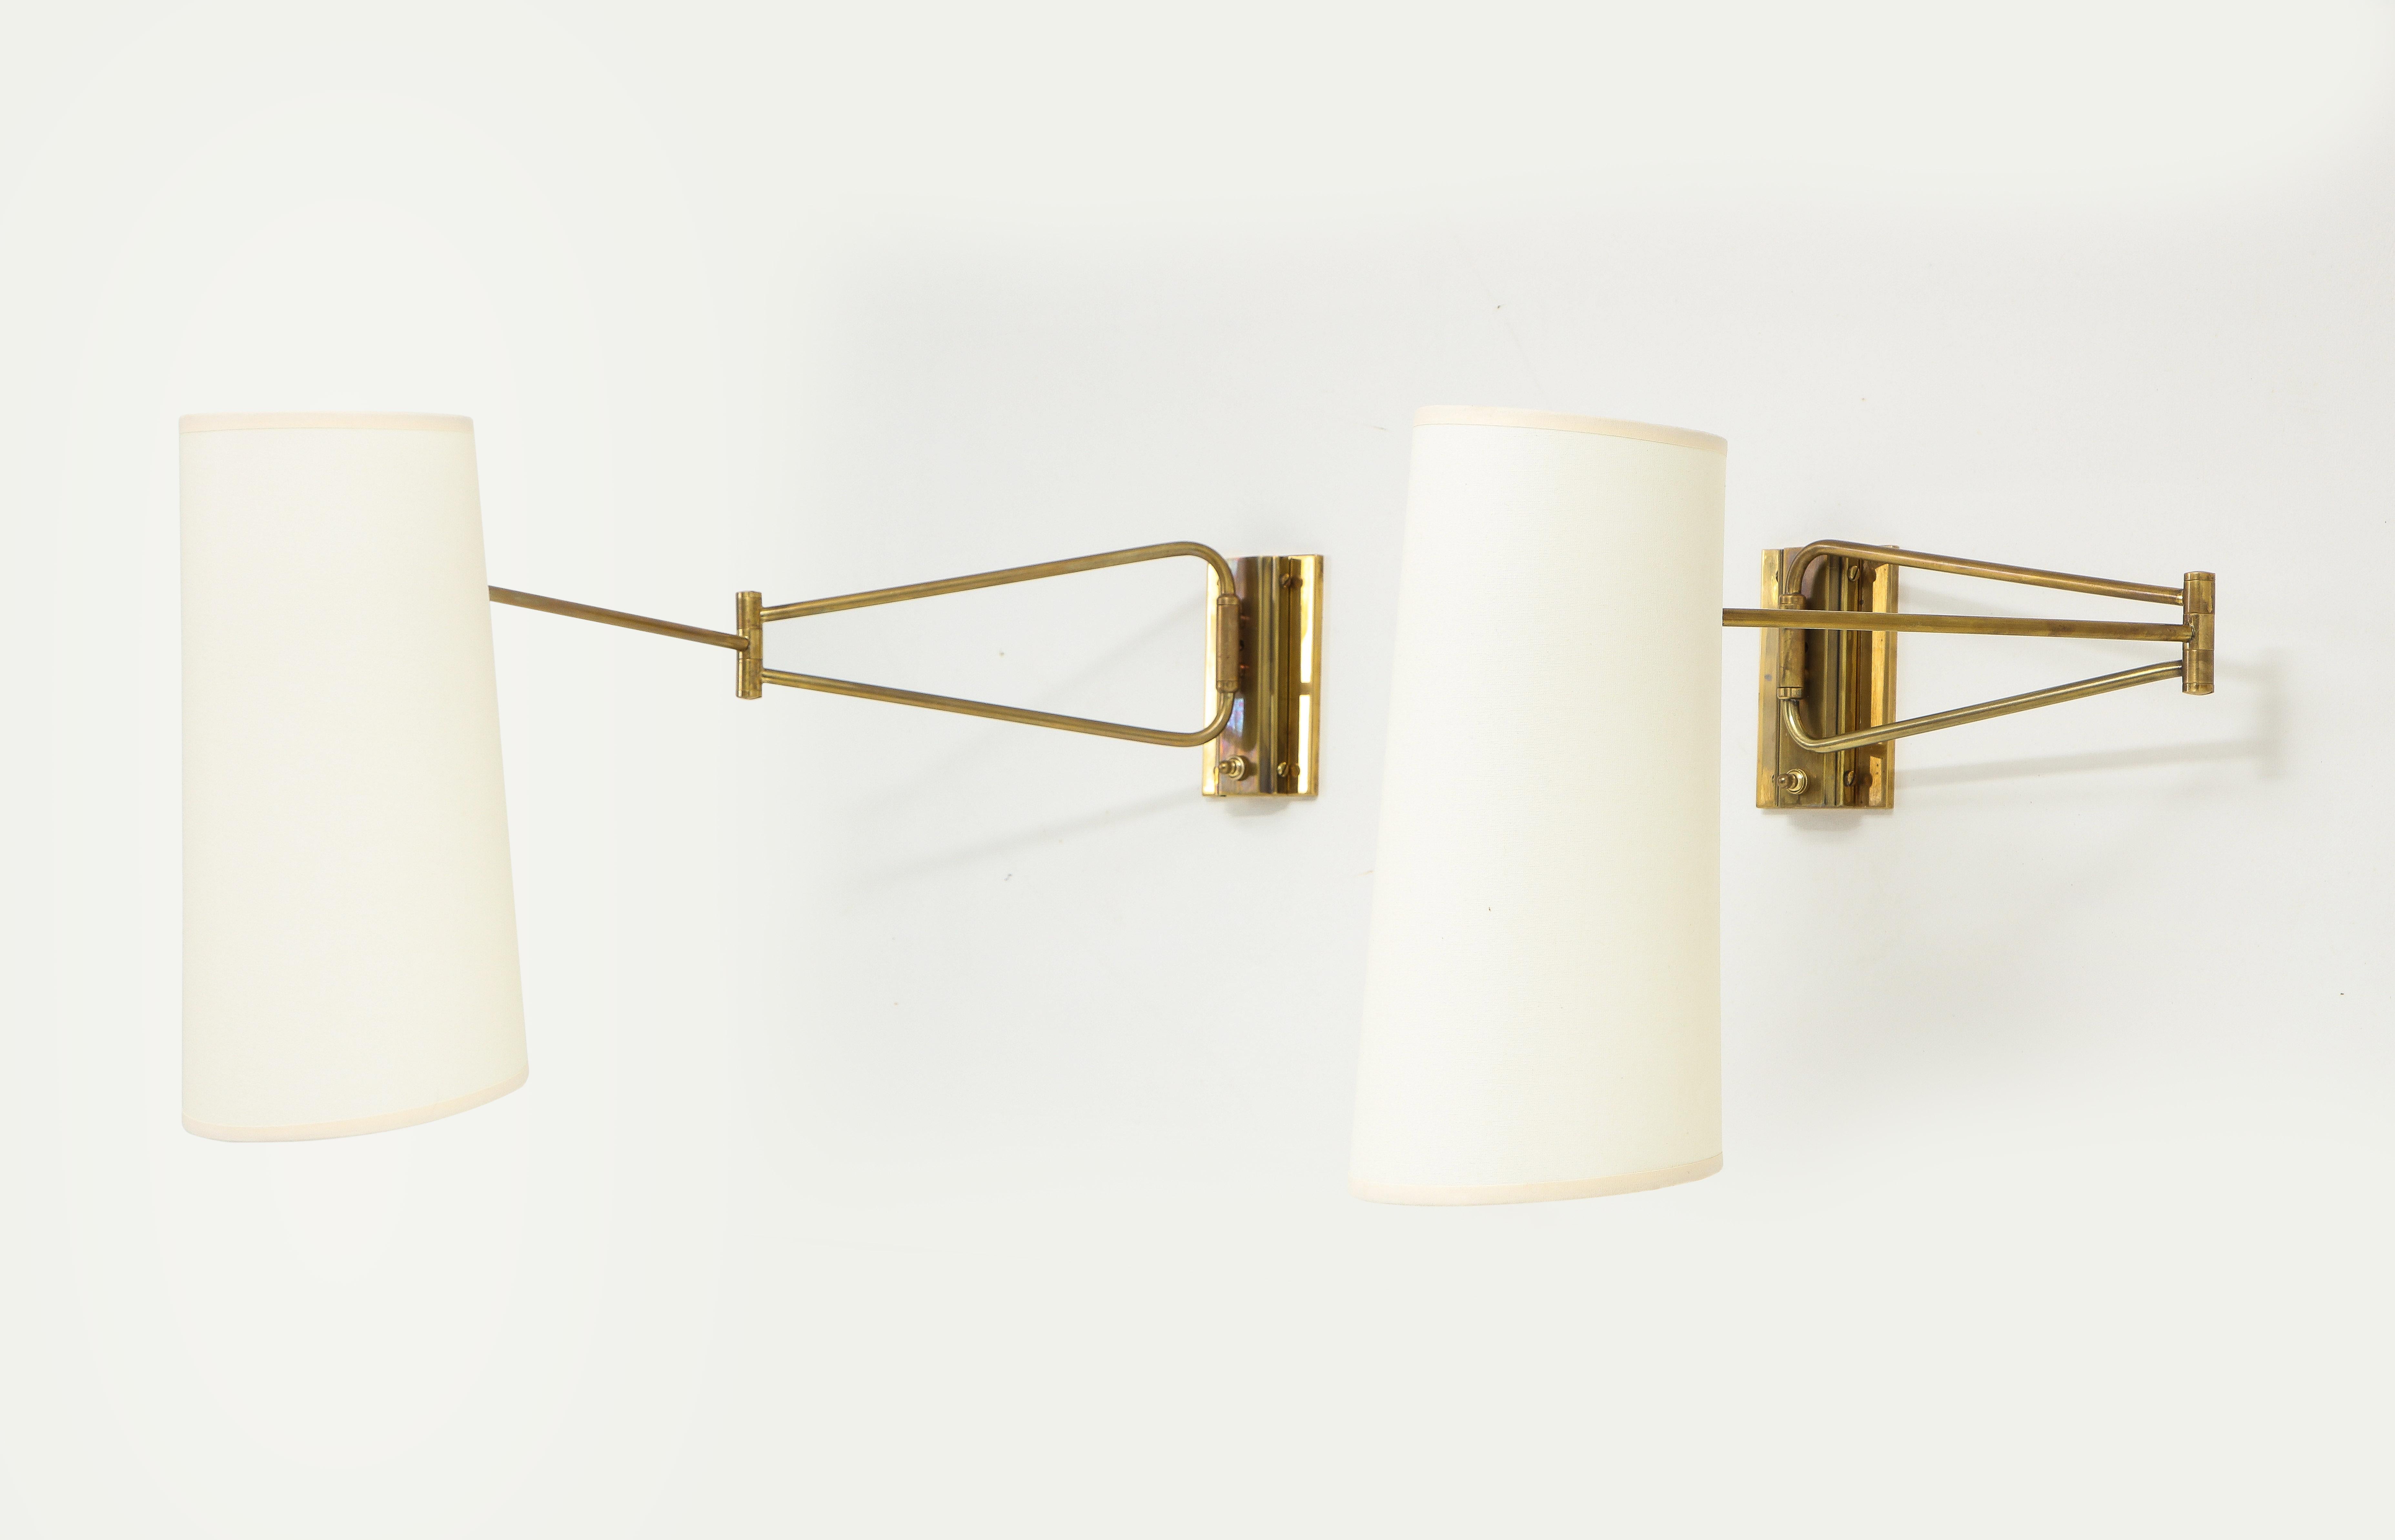 Pair of Brass Lunel Swingarm Sconces with Paper Shades, France 1960's For Sale 3